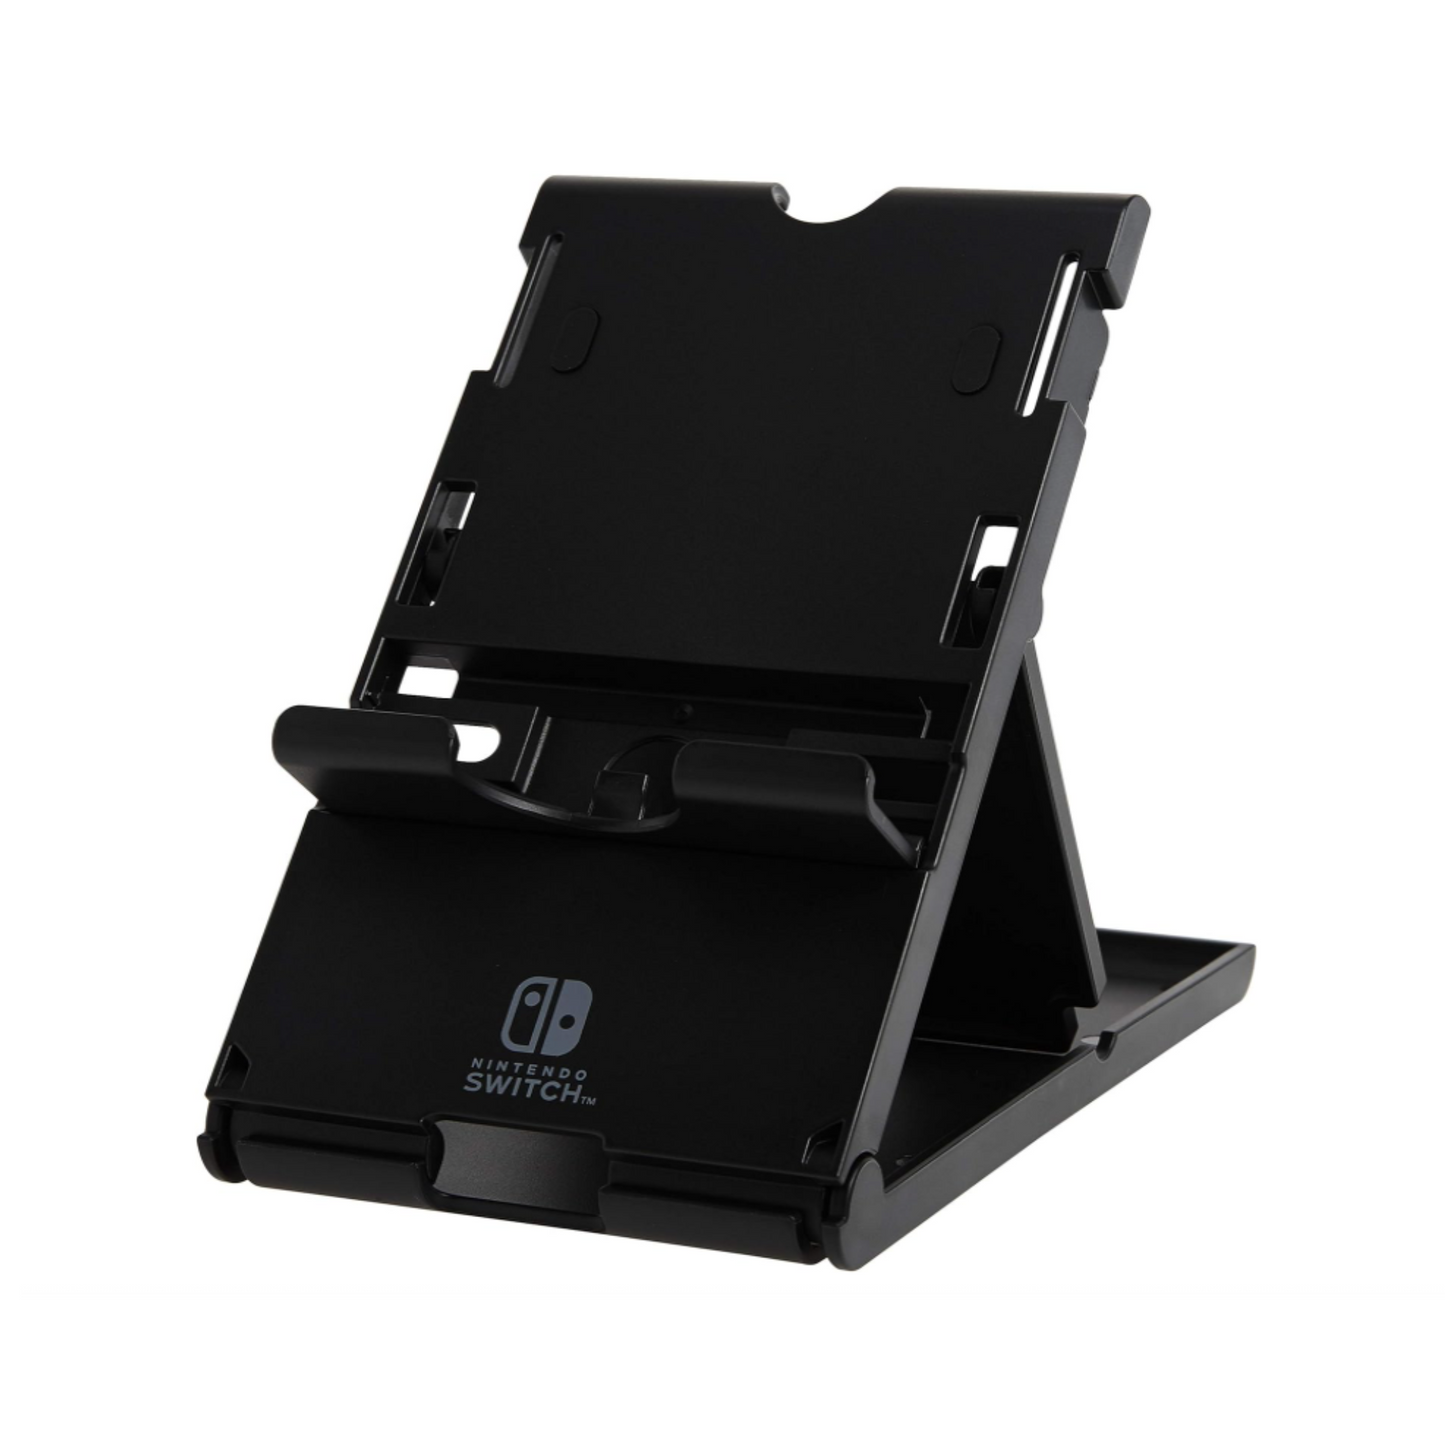 Black Playstand for Nintendo Switch